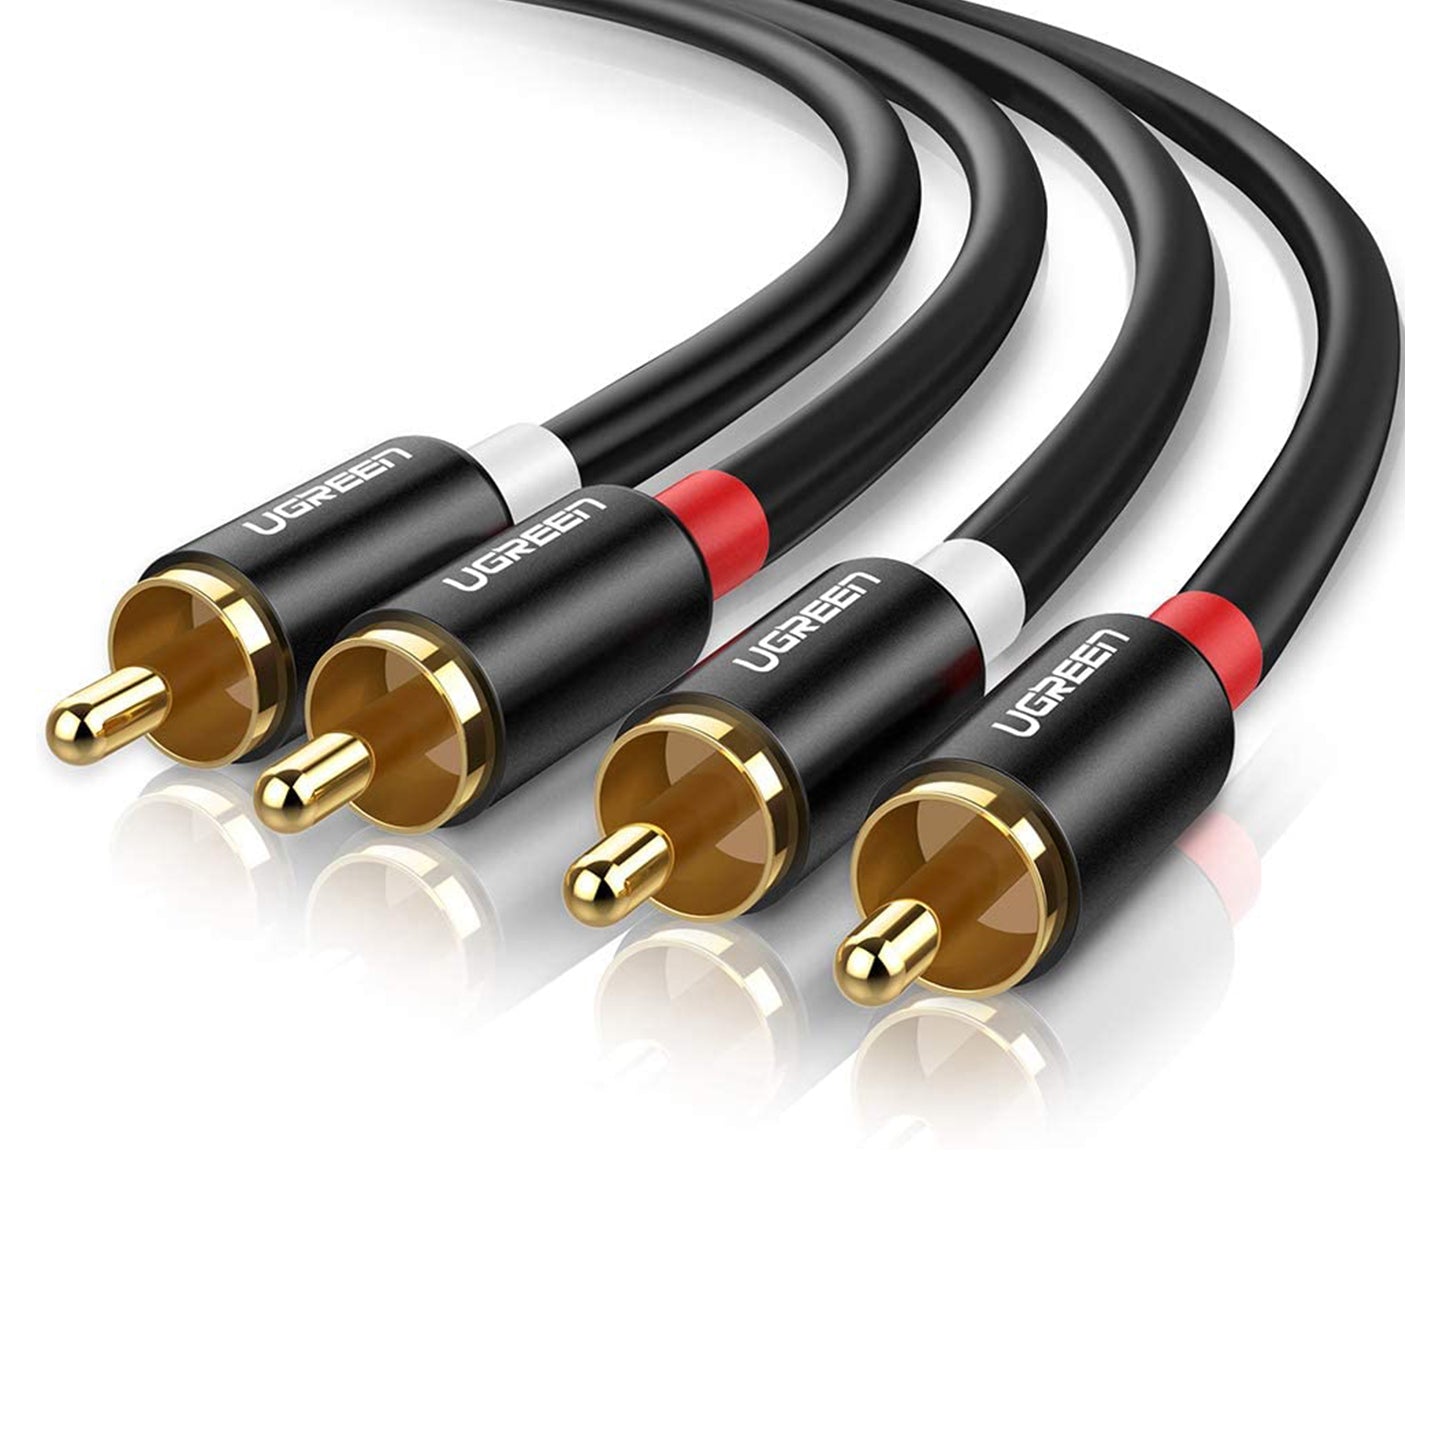 UGREEN 2 RCA Male to Male Stereo Audio Jack Gold-Plated Cable for Audio, Amplifier, TV, DVD Devices (1M, 1.5M 2M, 3M, 5M) - Black | 30747 10517 10518 10519 10520